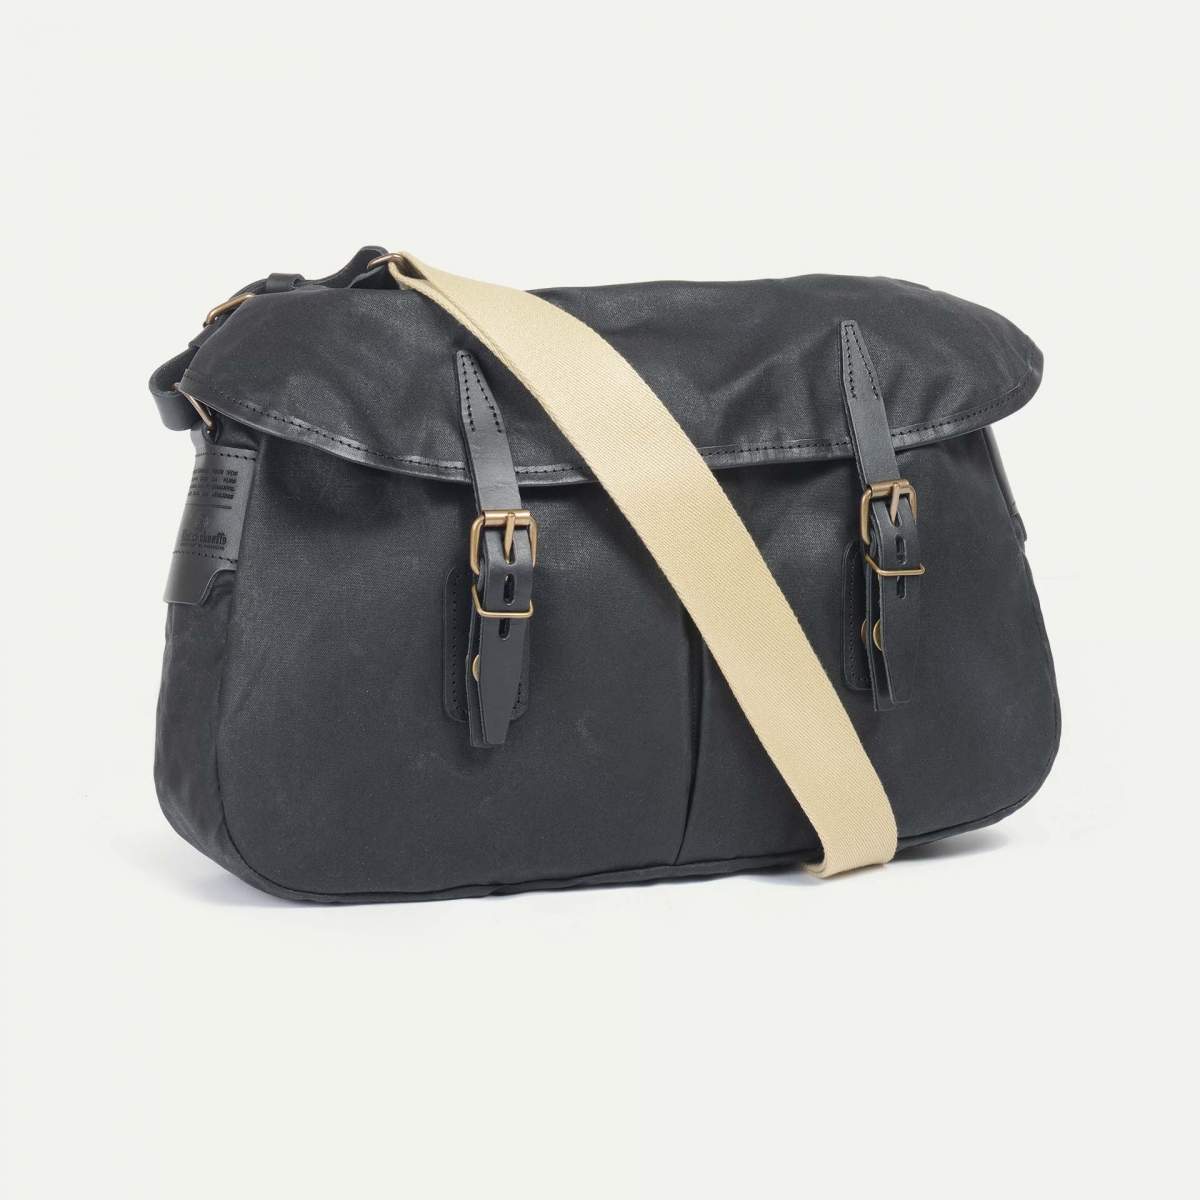 Musette with flap in black